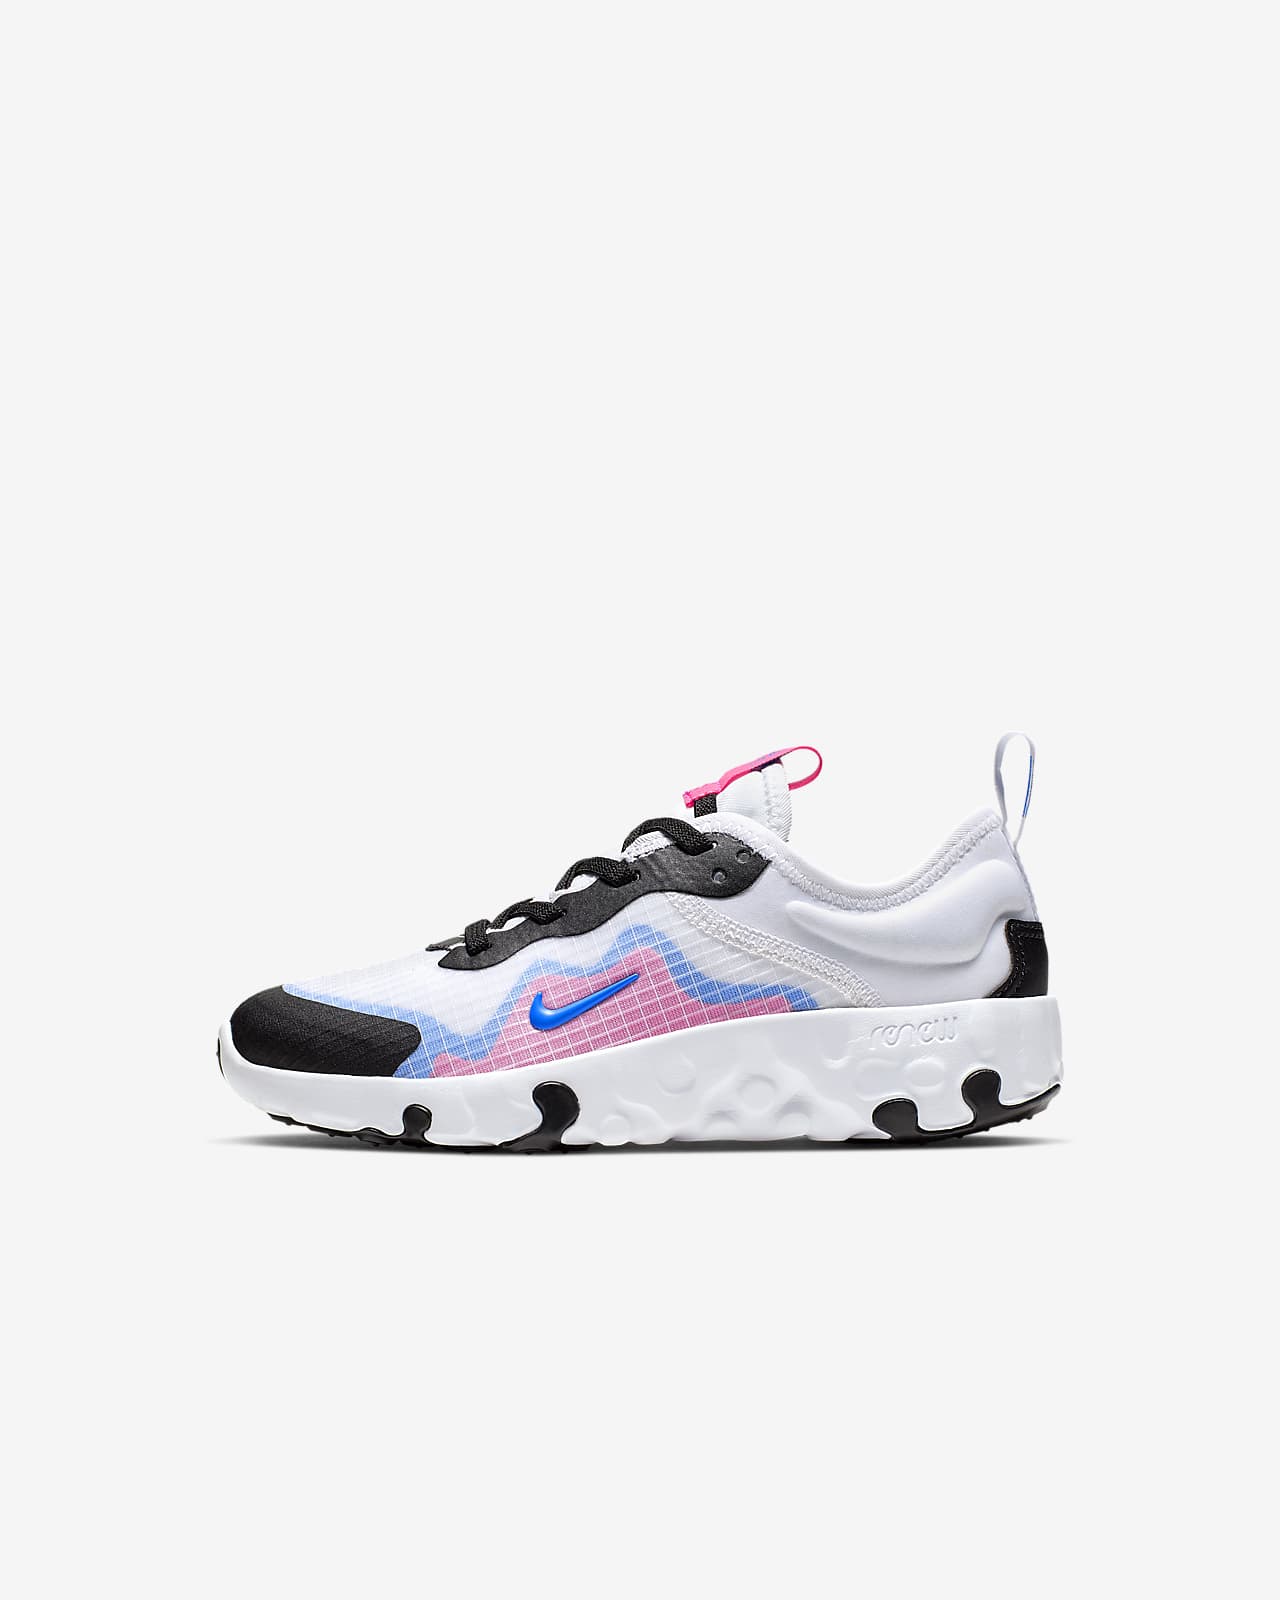 nike lucent pink